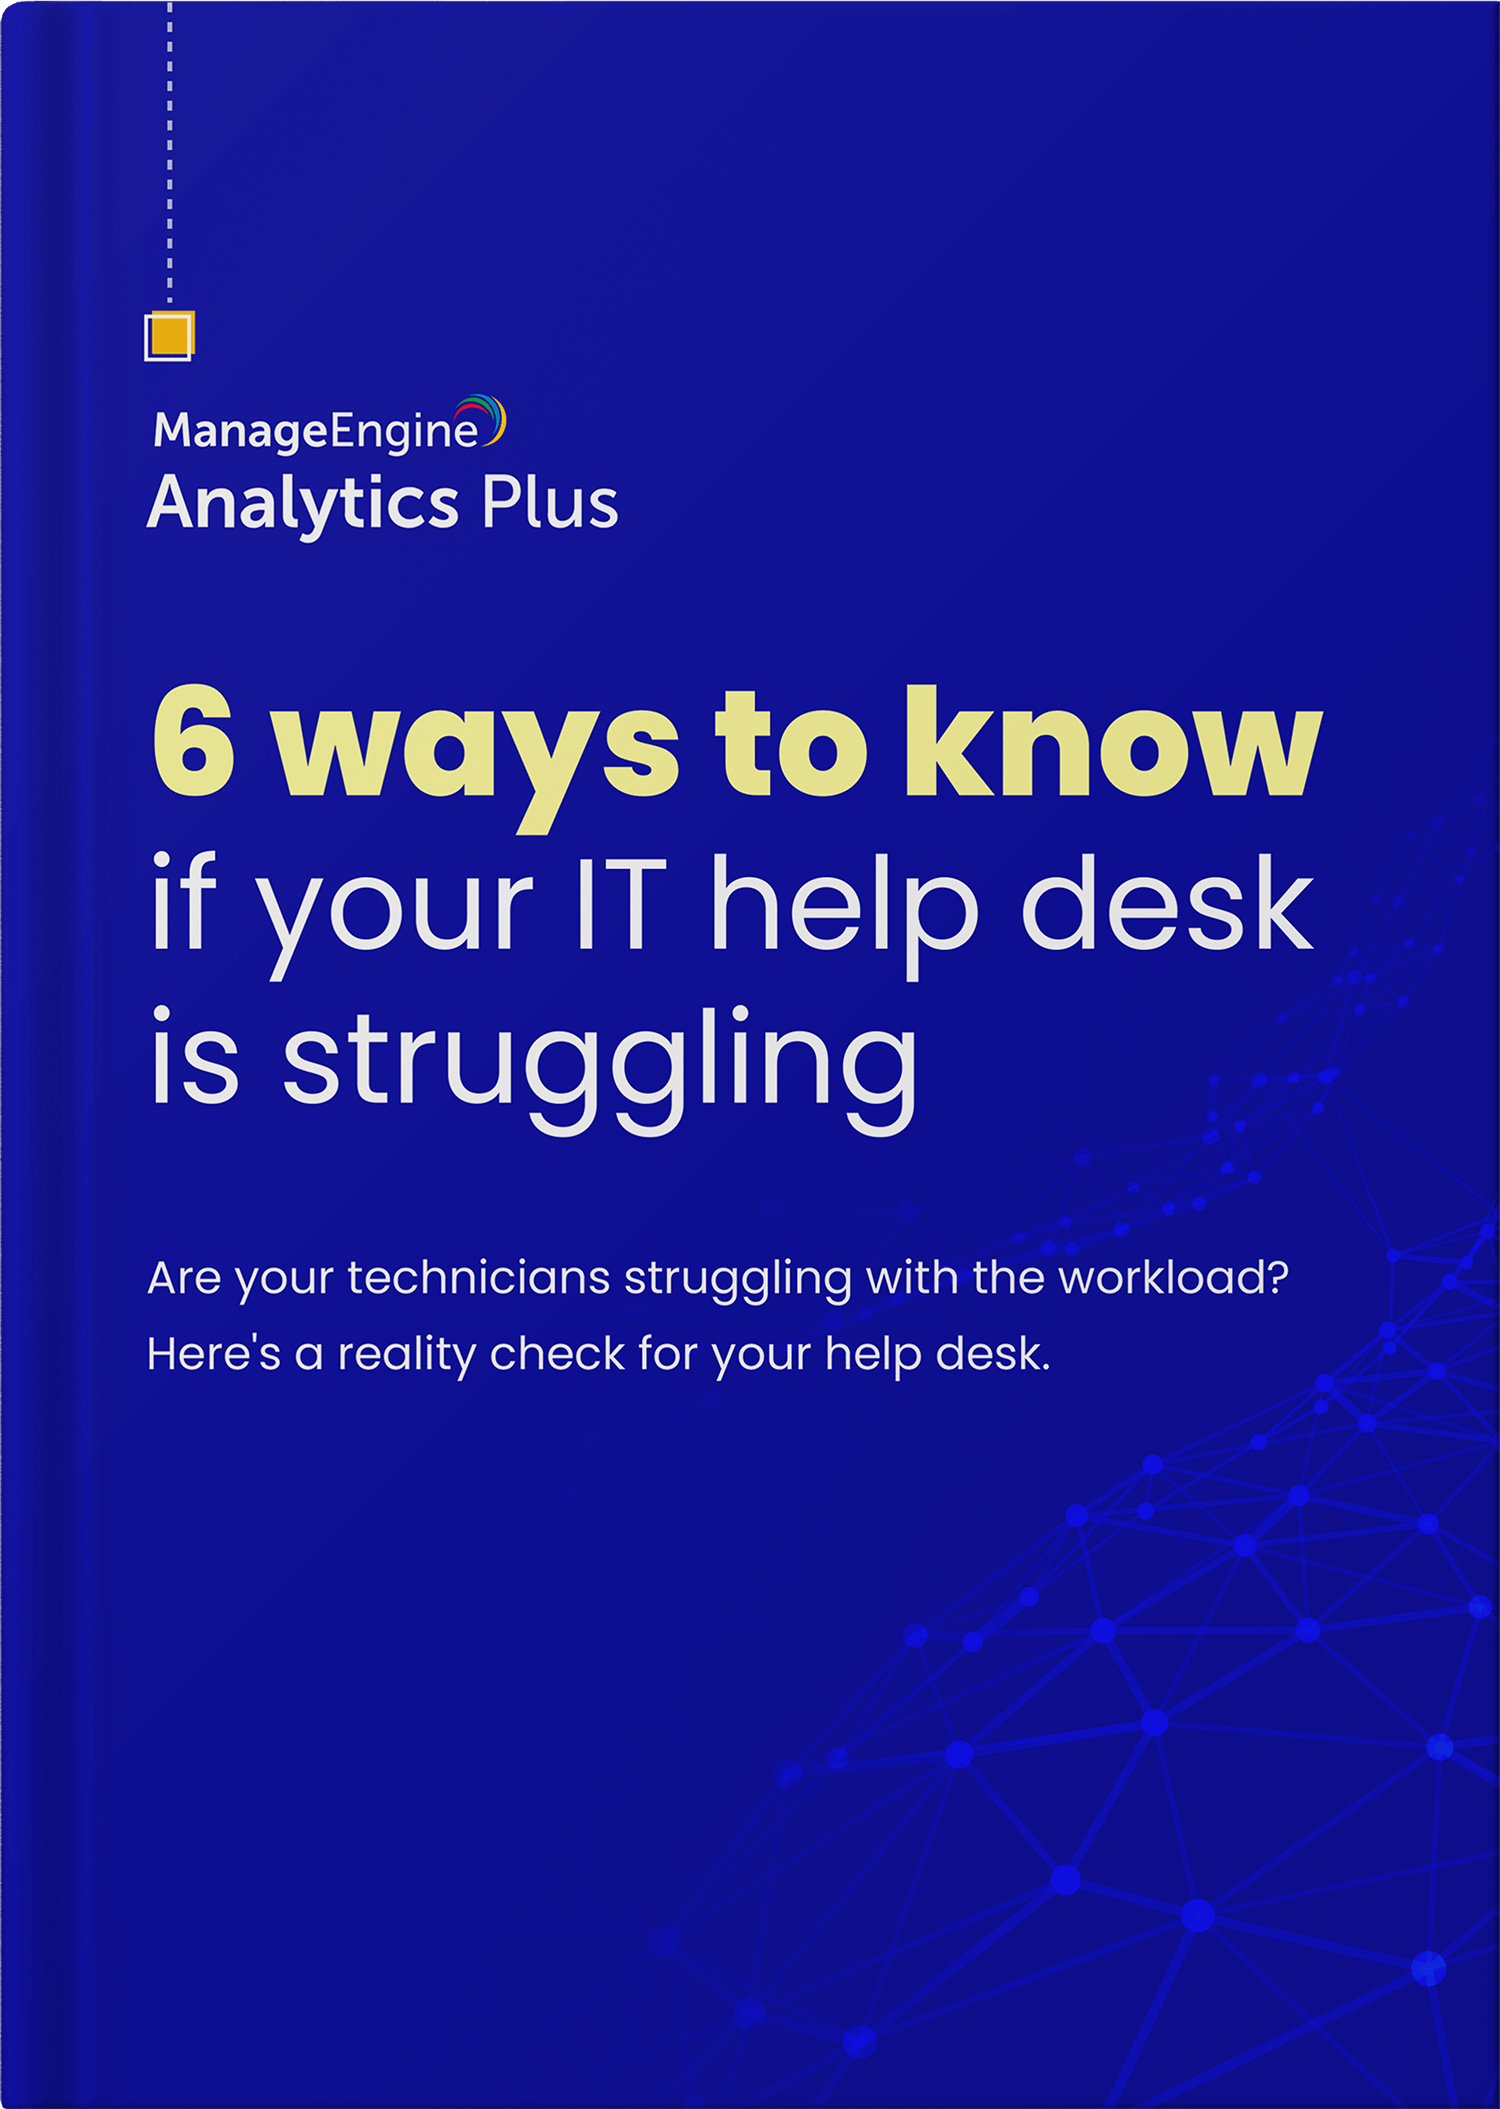 Discover six ways to know if your IT help desk is struggling